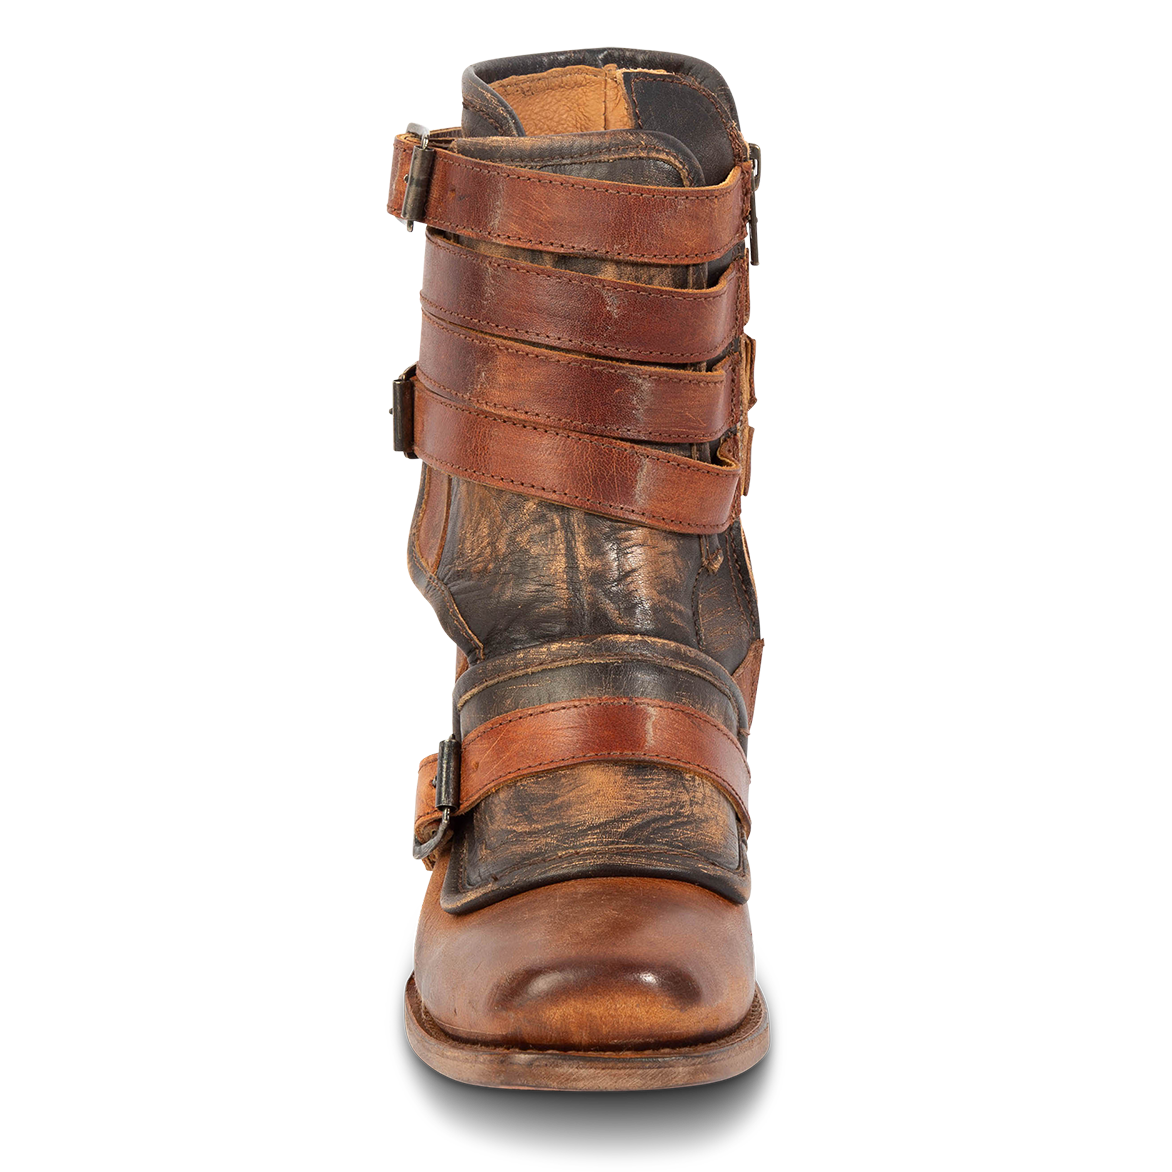 Front view showing FREEBIRD women's Darlin cognac leather bootie with leather straps and square toe